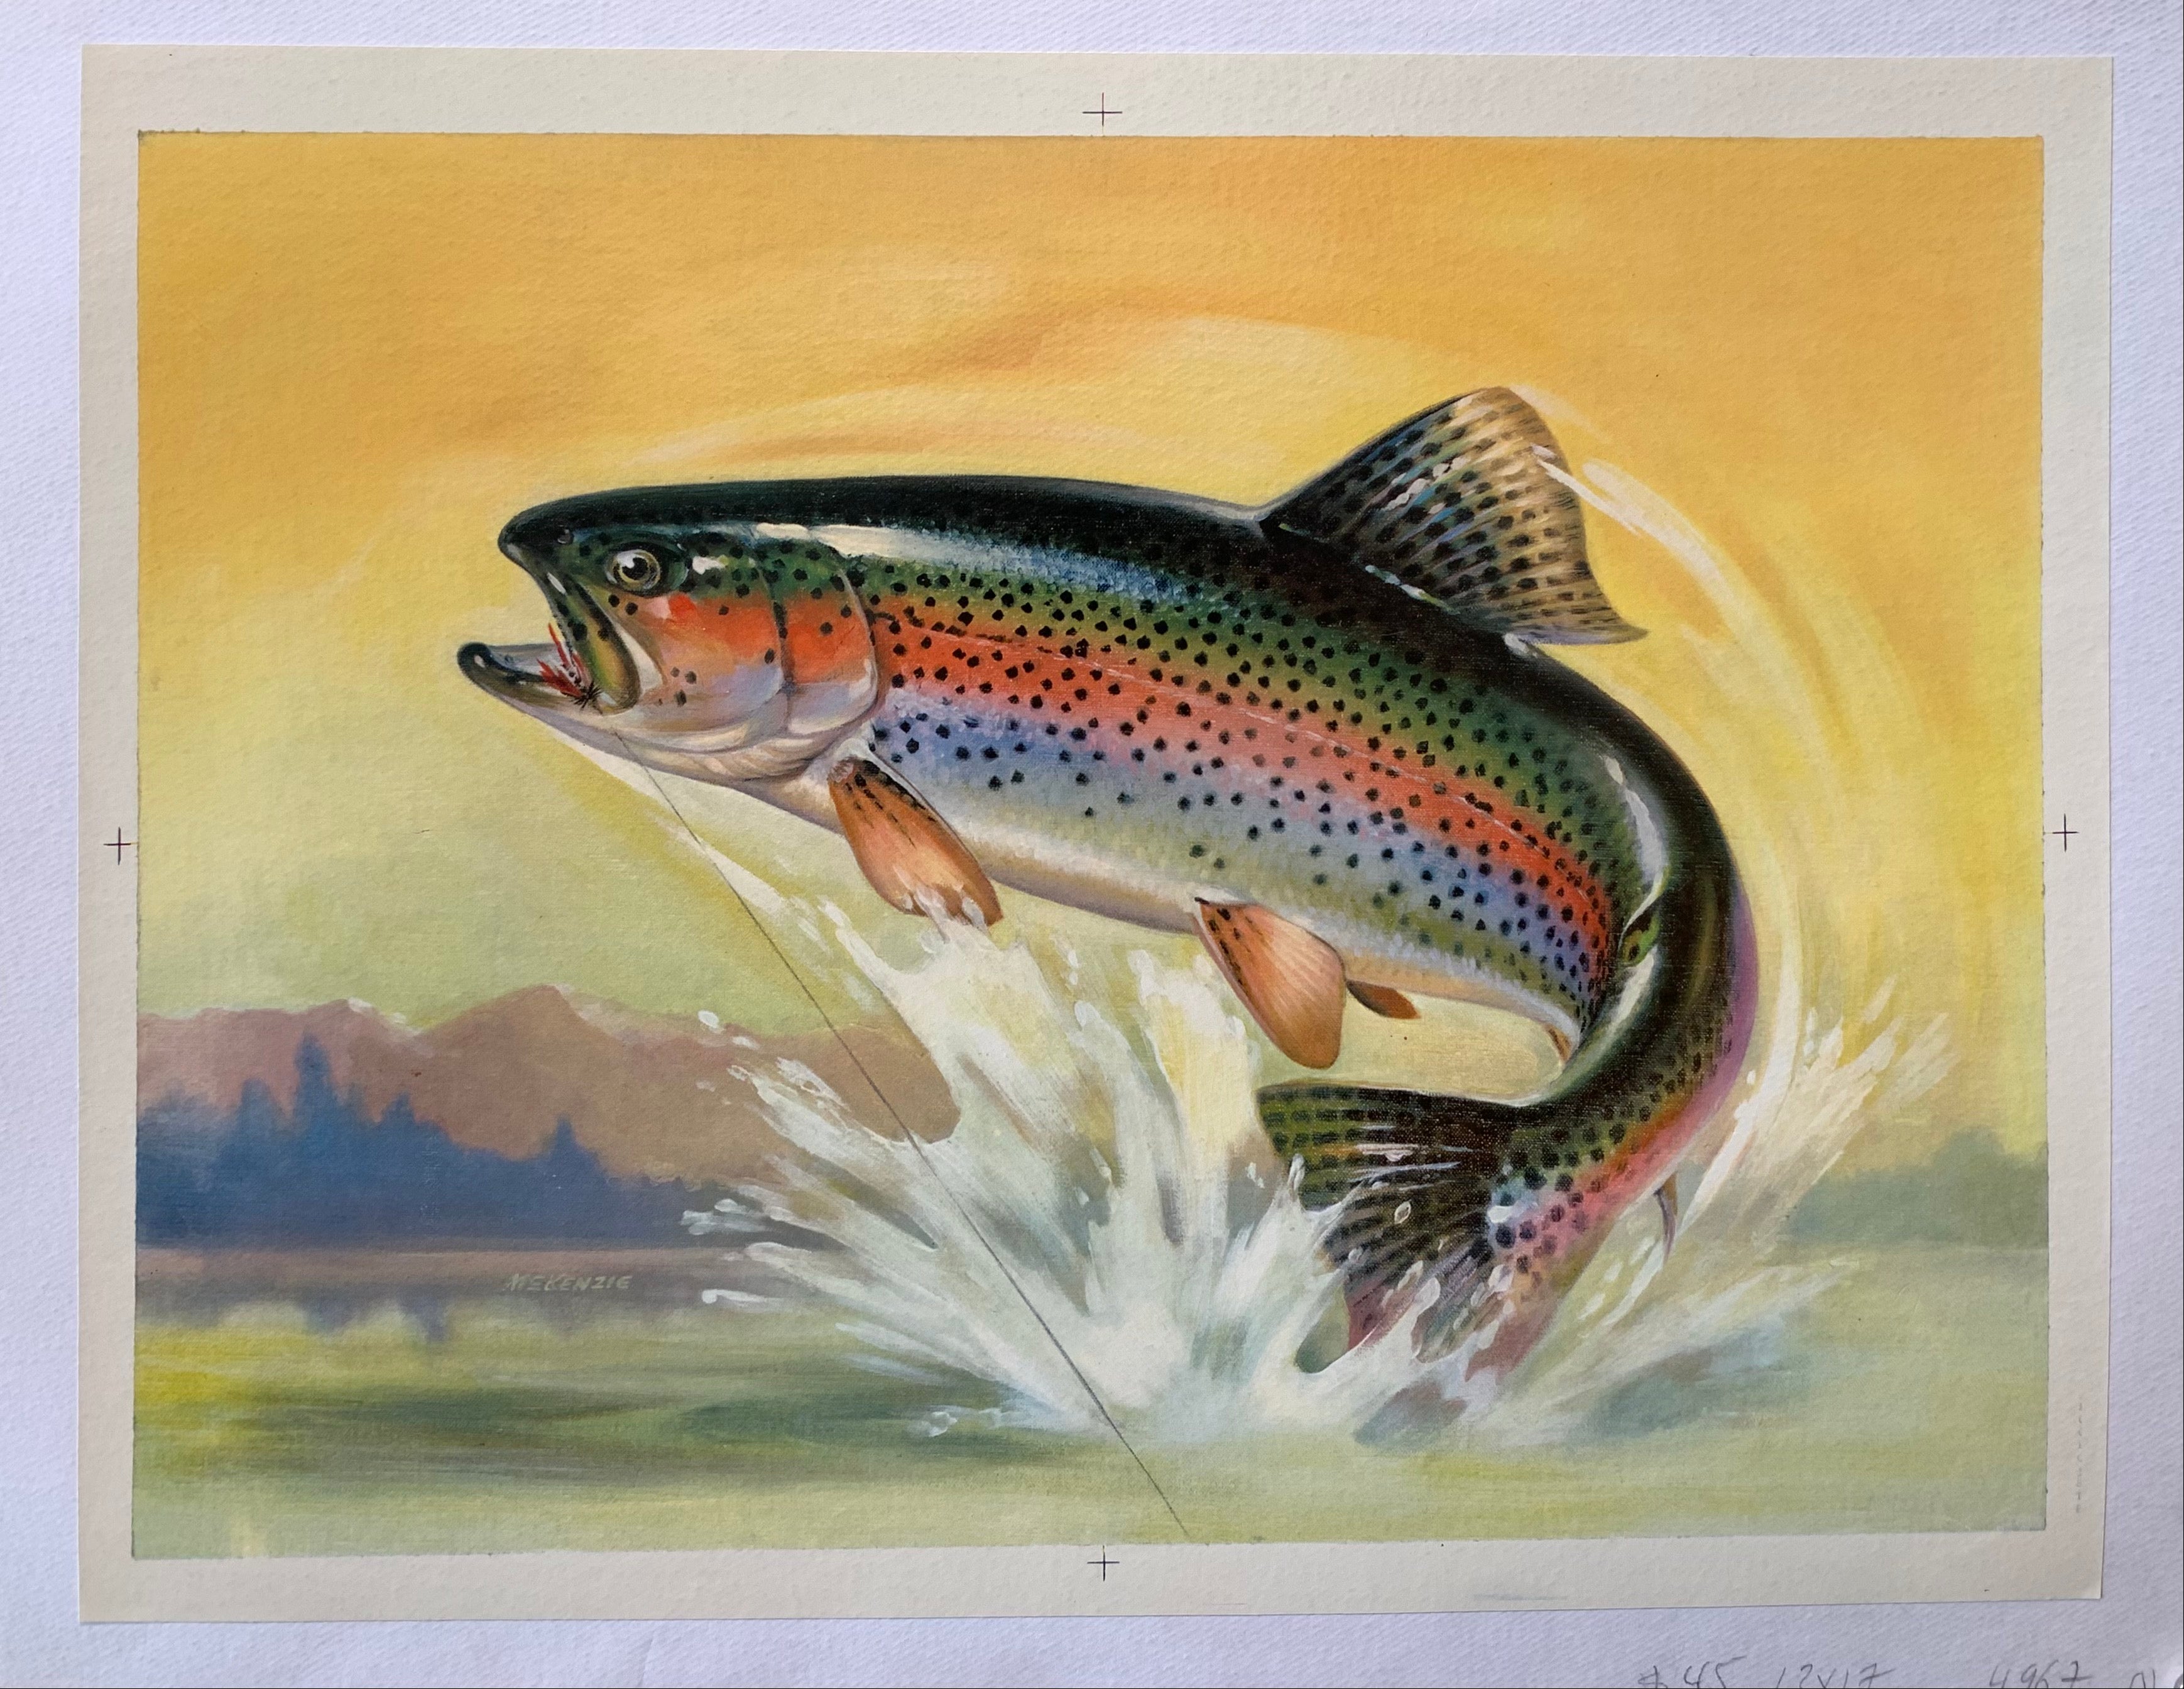 rainbow trout jumping